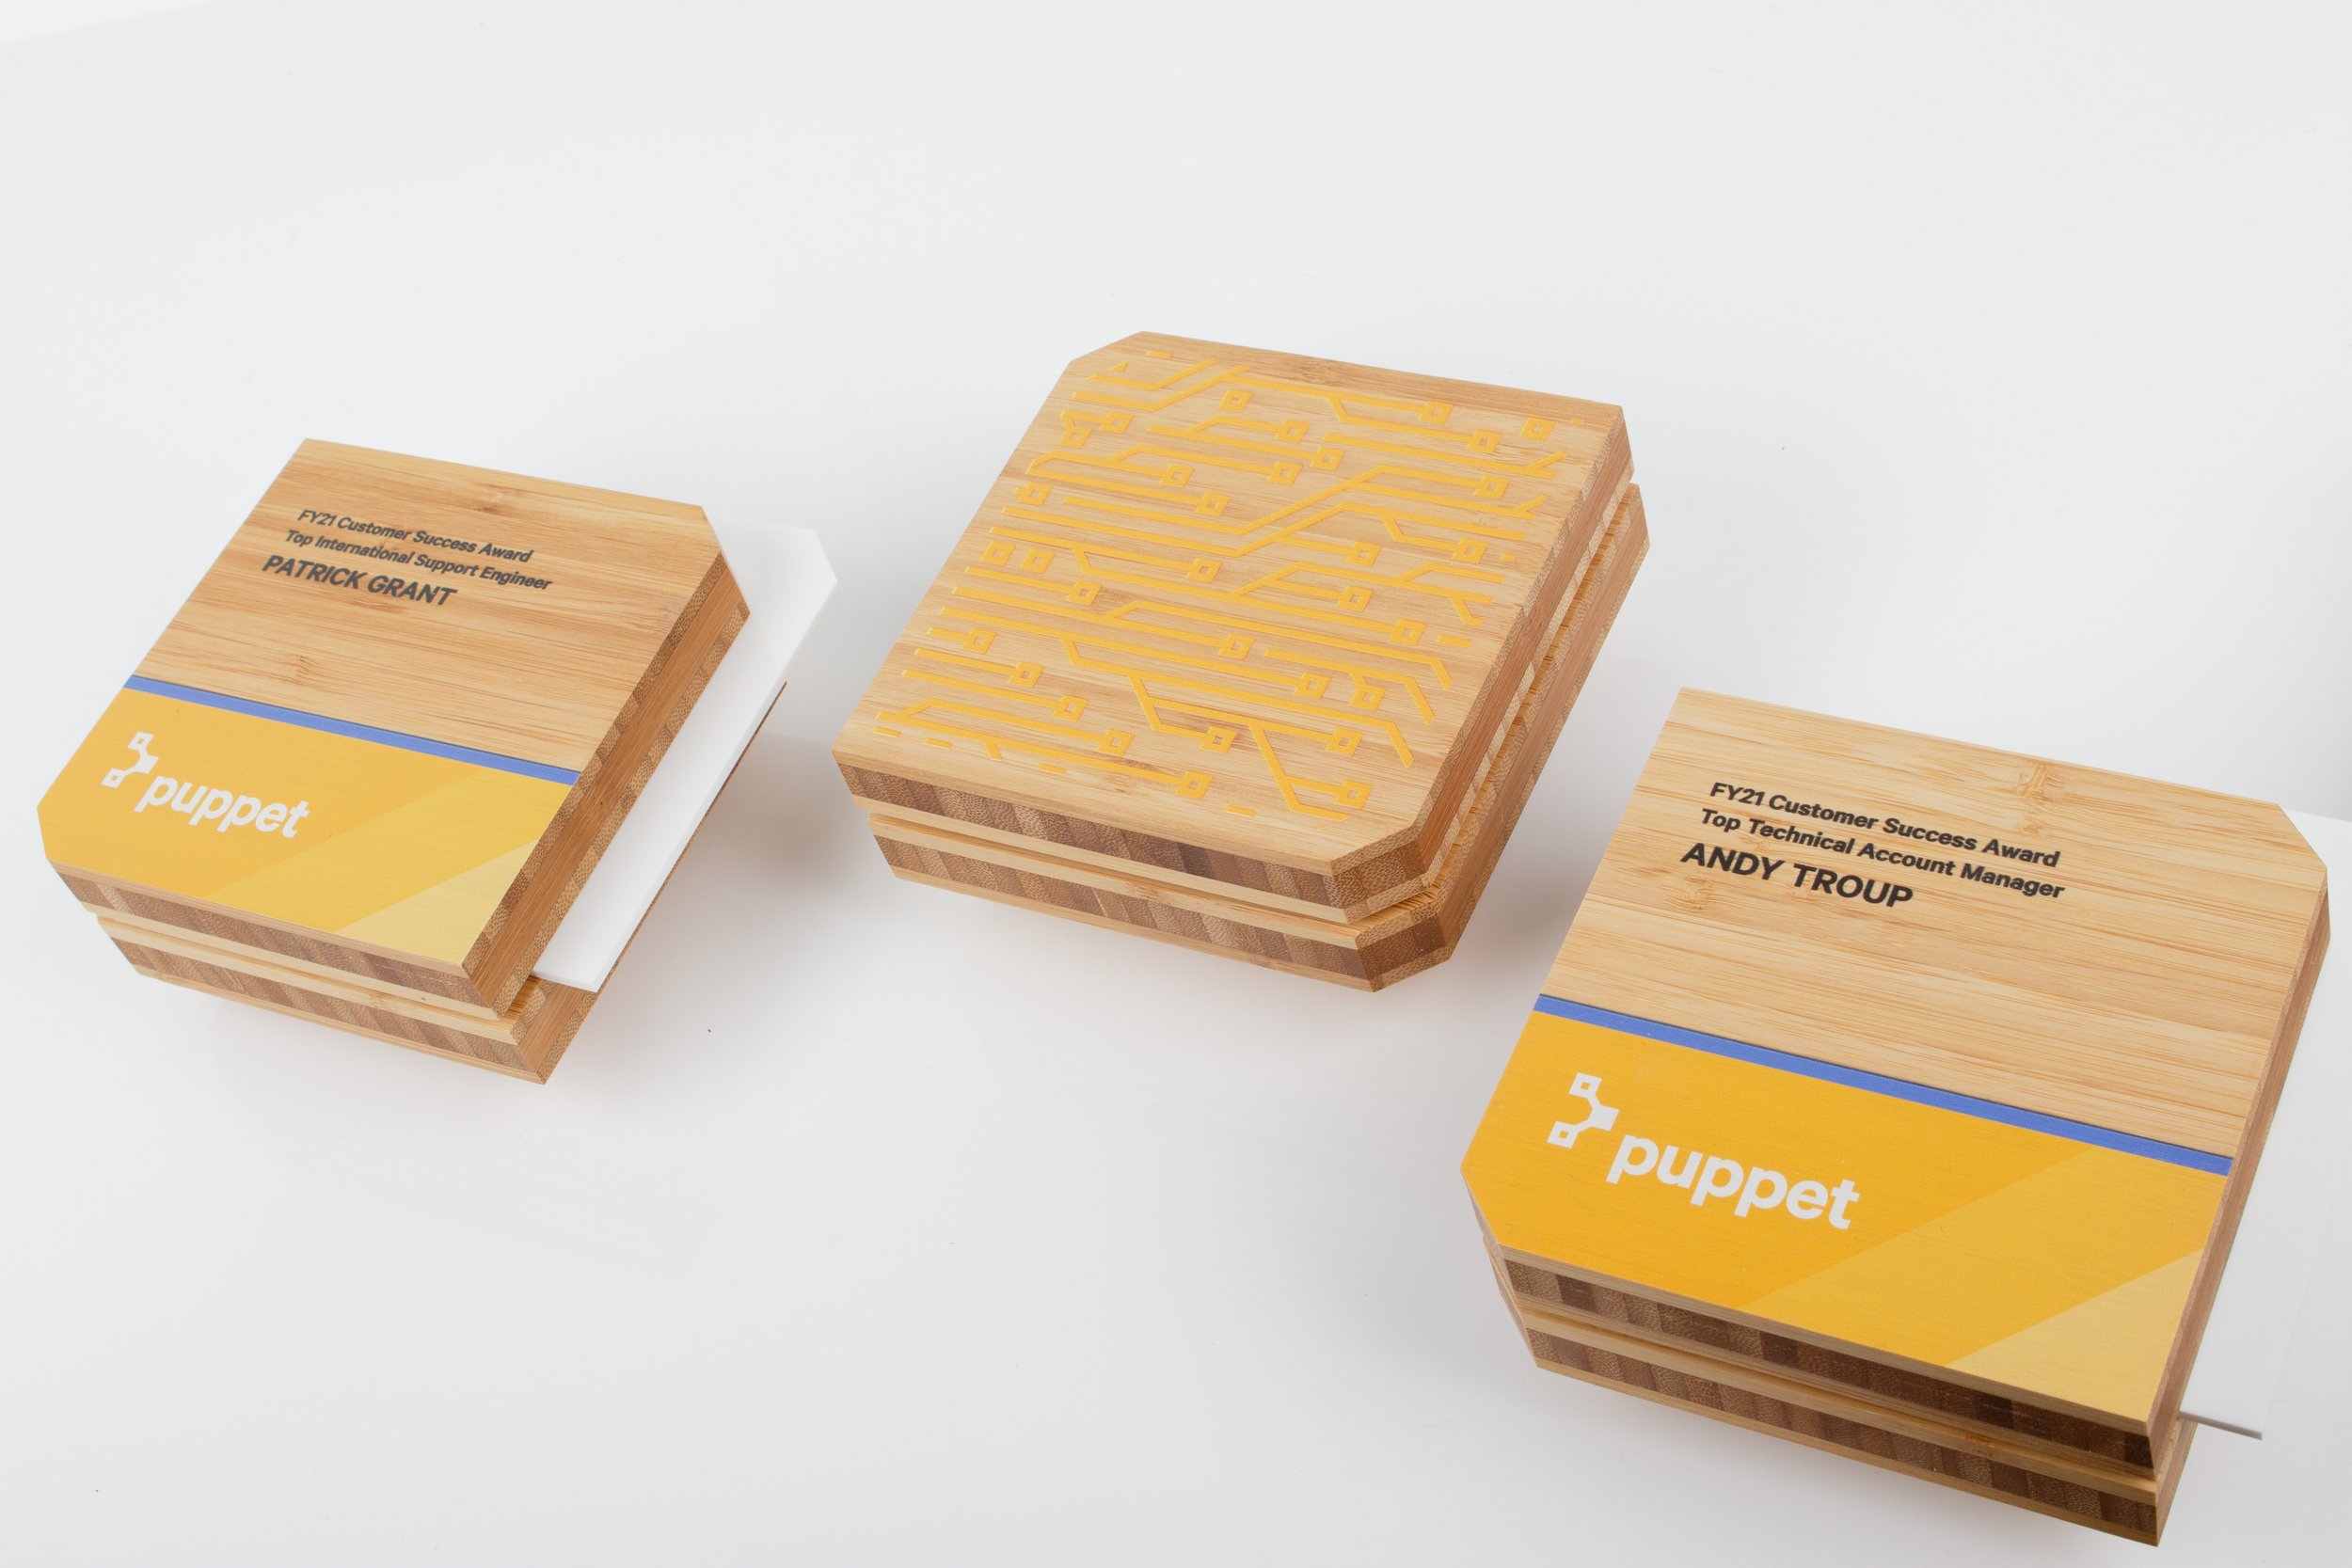 Bespoke bamboo secondary awards for Puppet